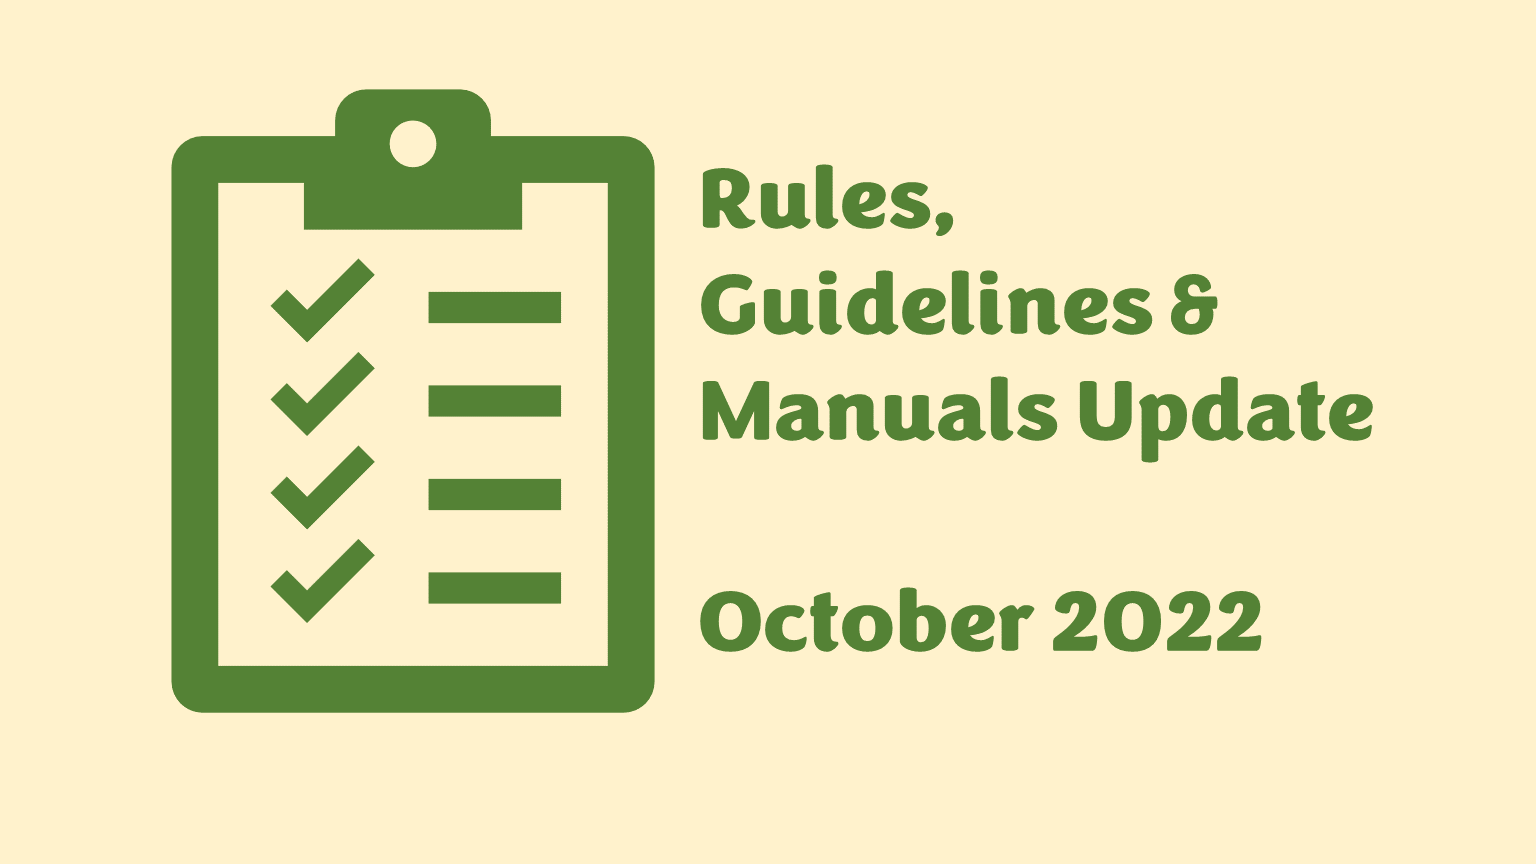 Rules, Guidelines and Manuals